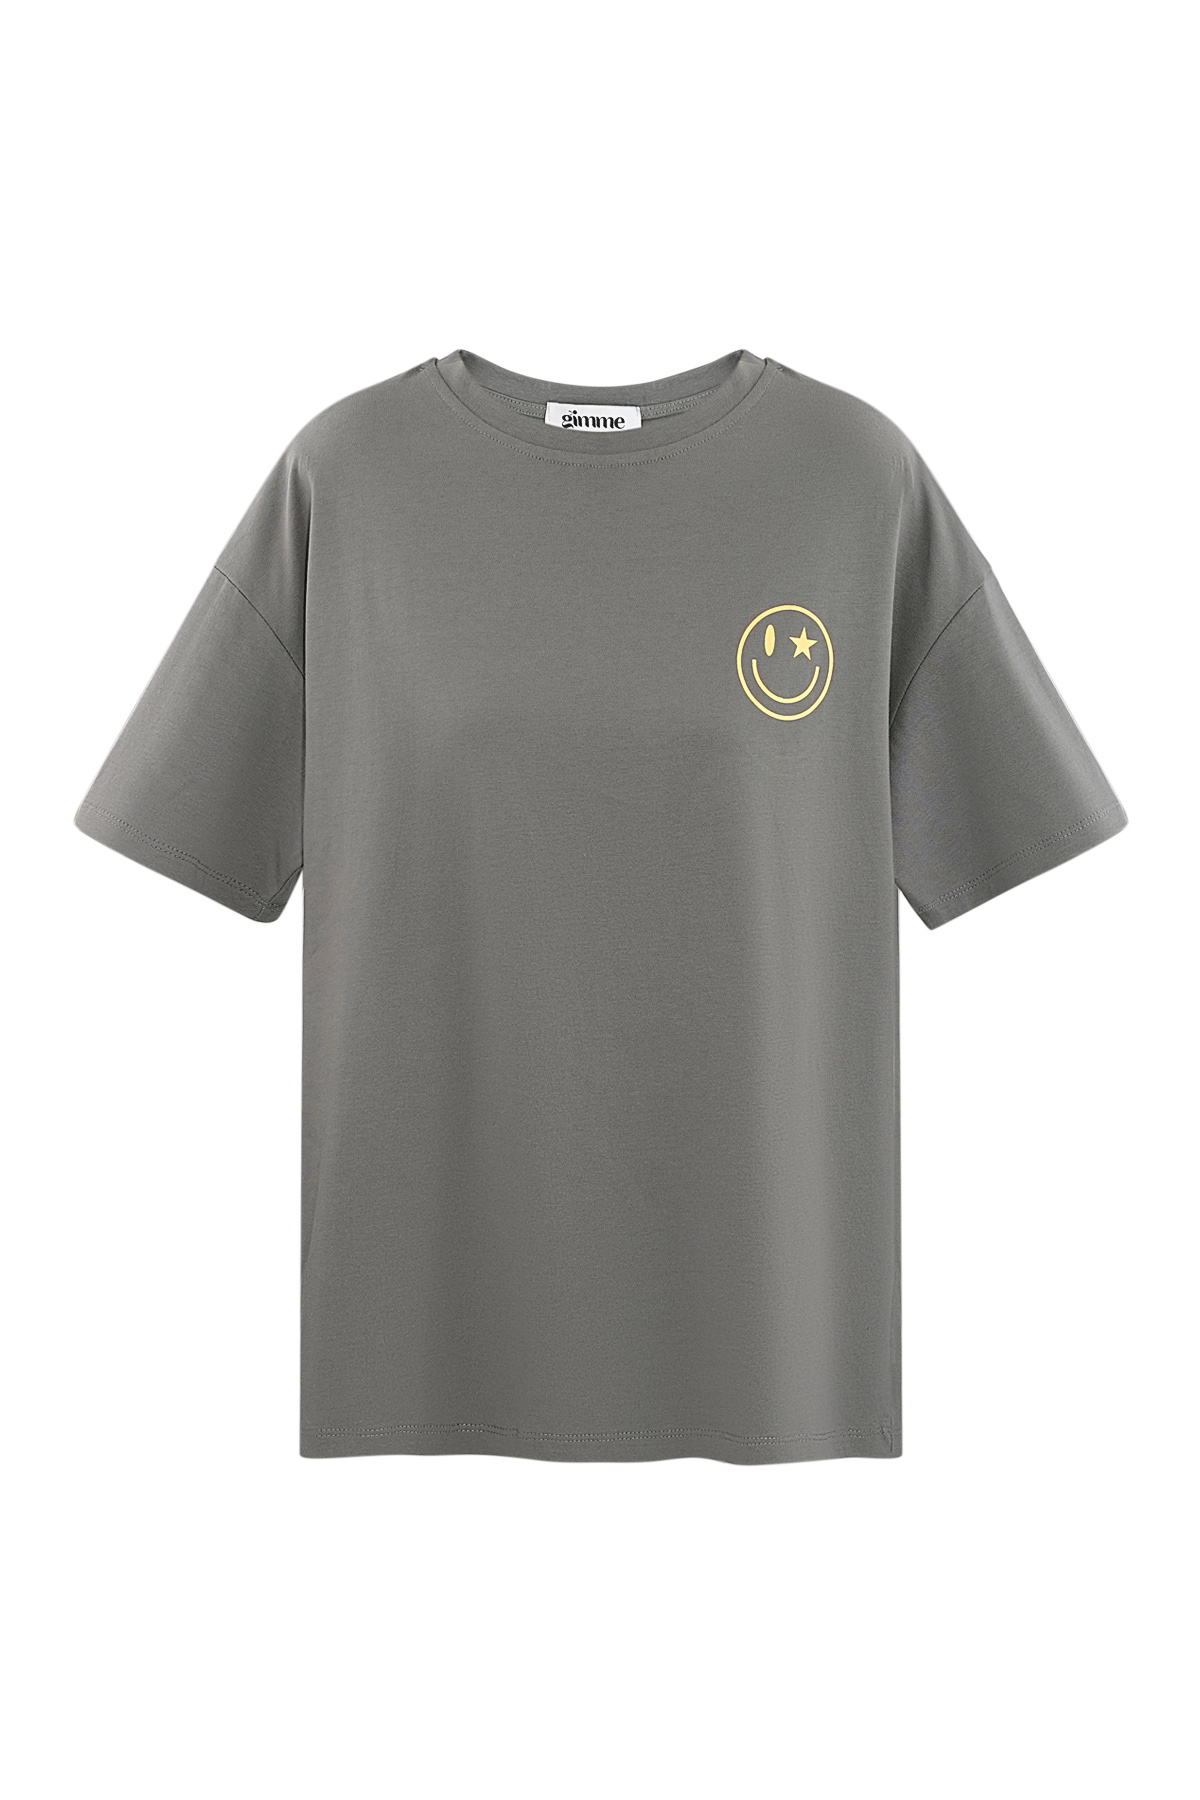 T-shirt happy life smiley - gris